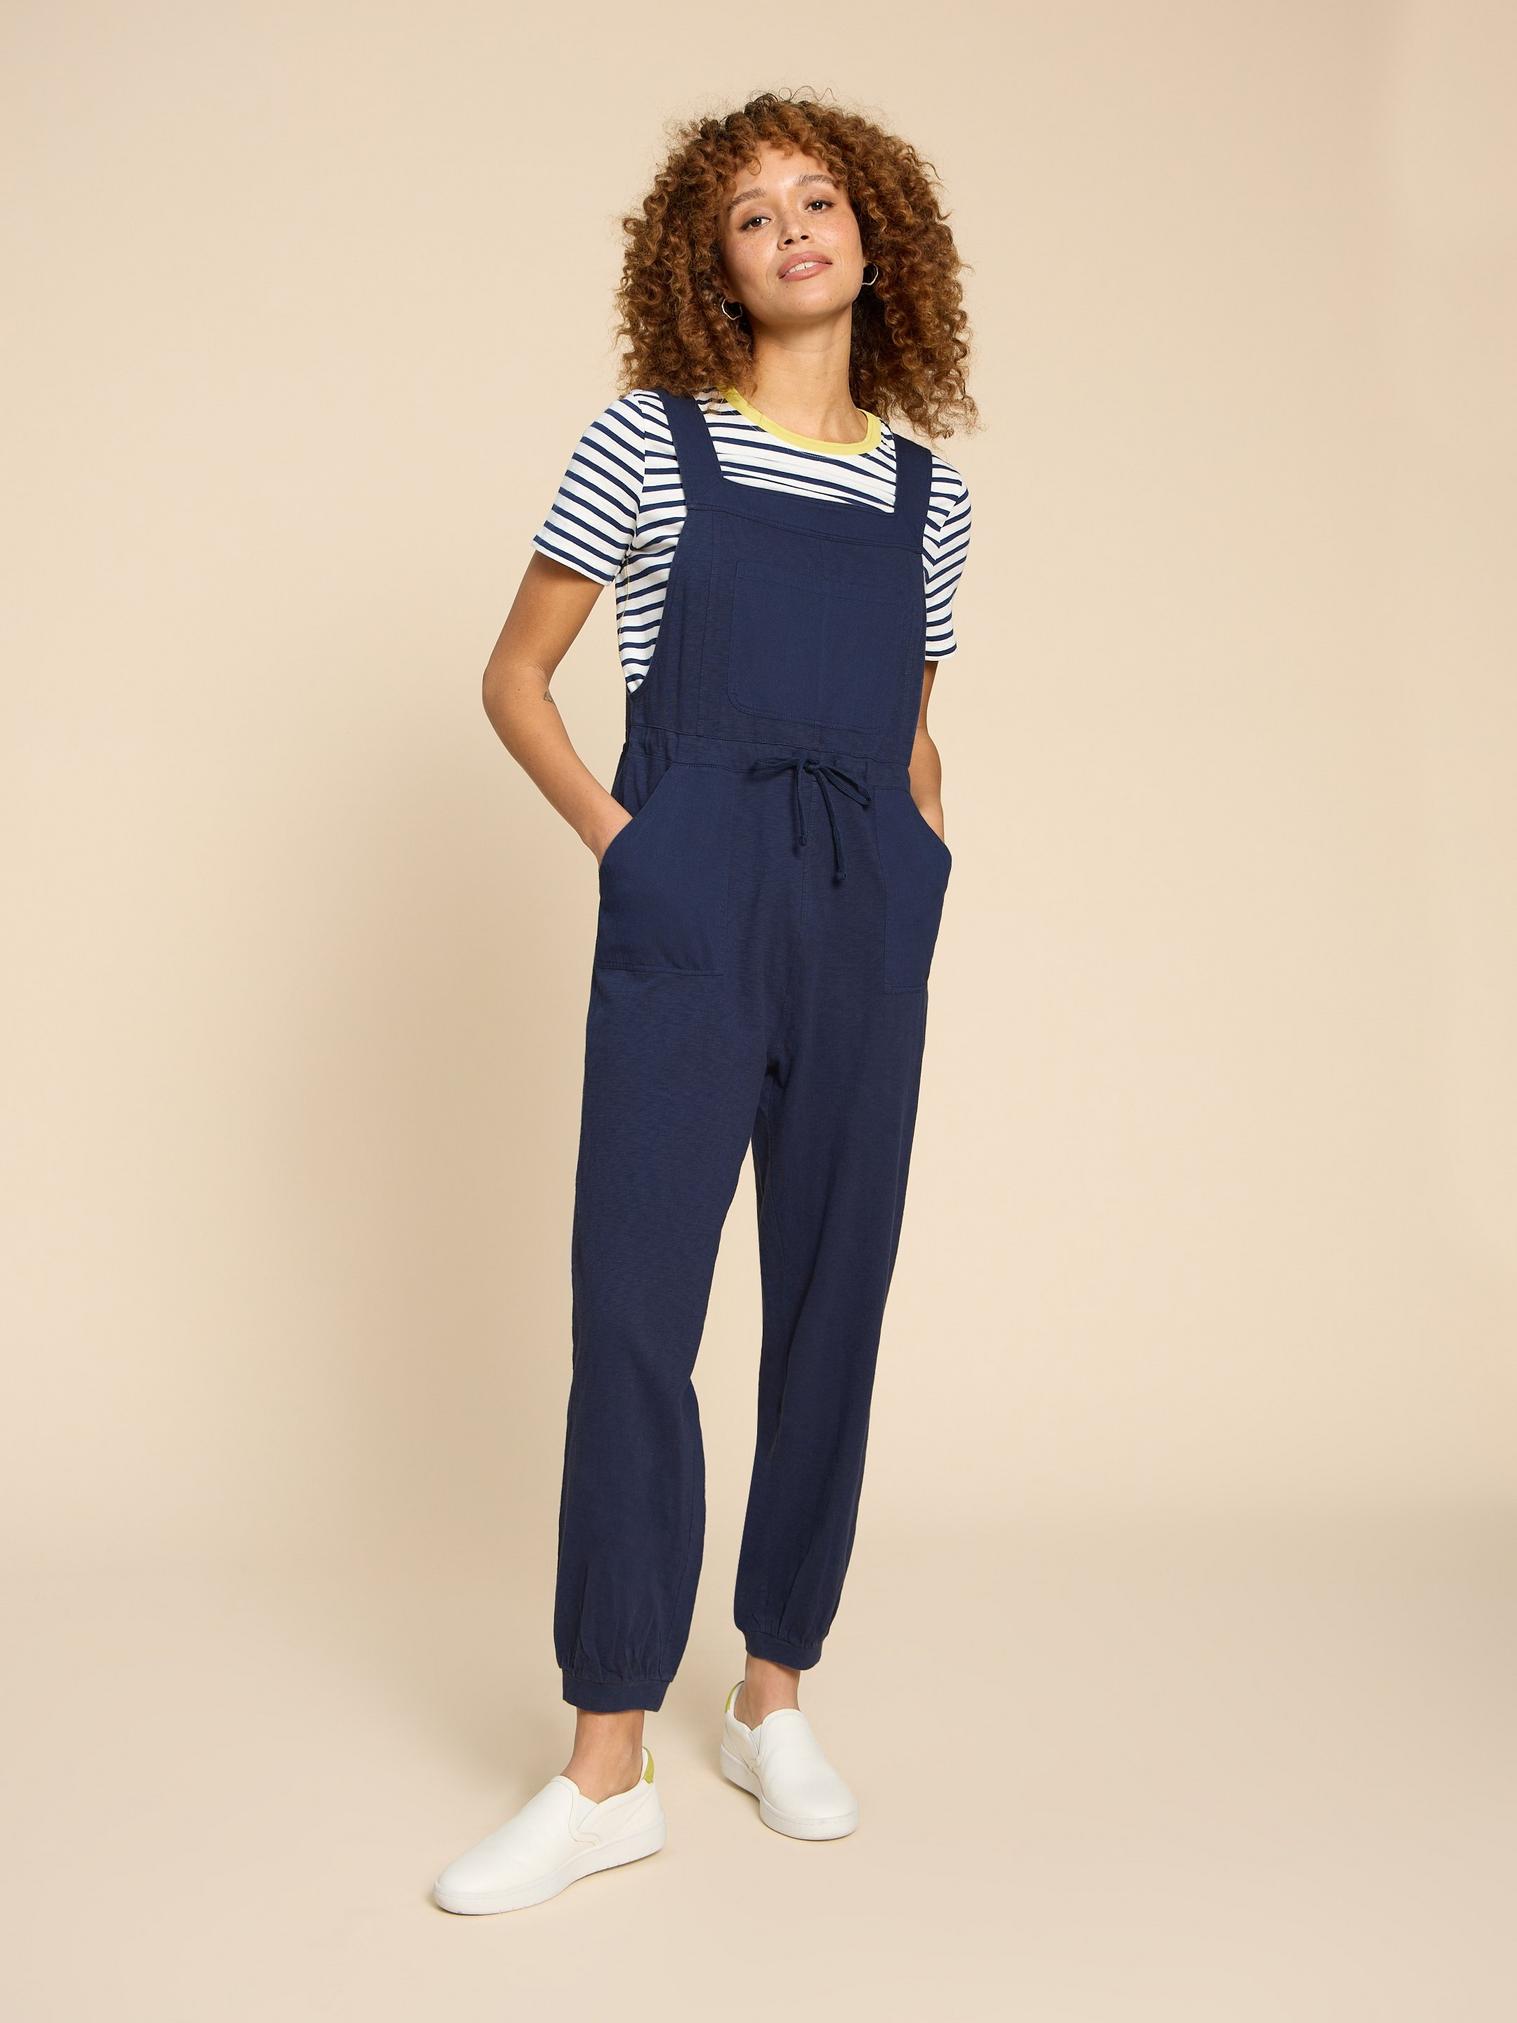 Daphne Jersey Dungaree in FR NAVY - MODEL FRONT